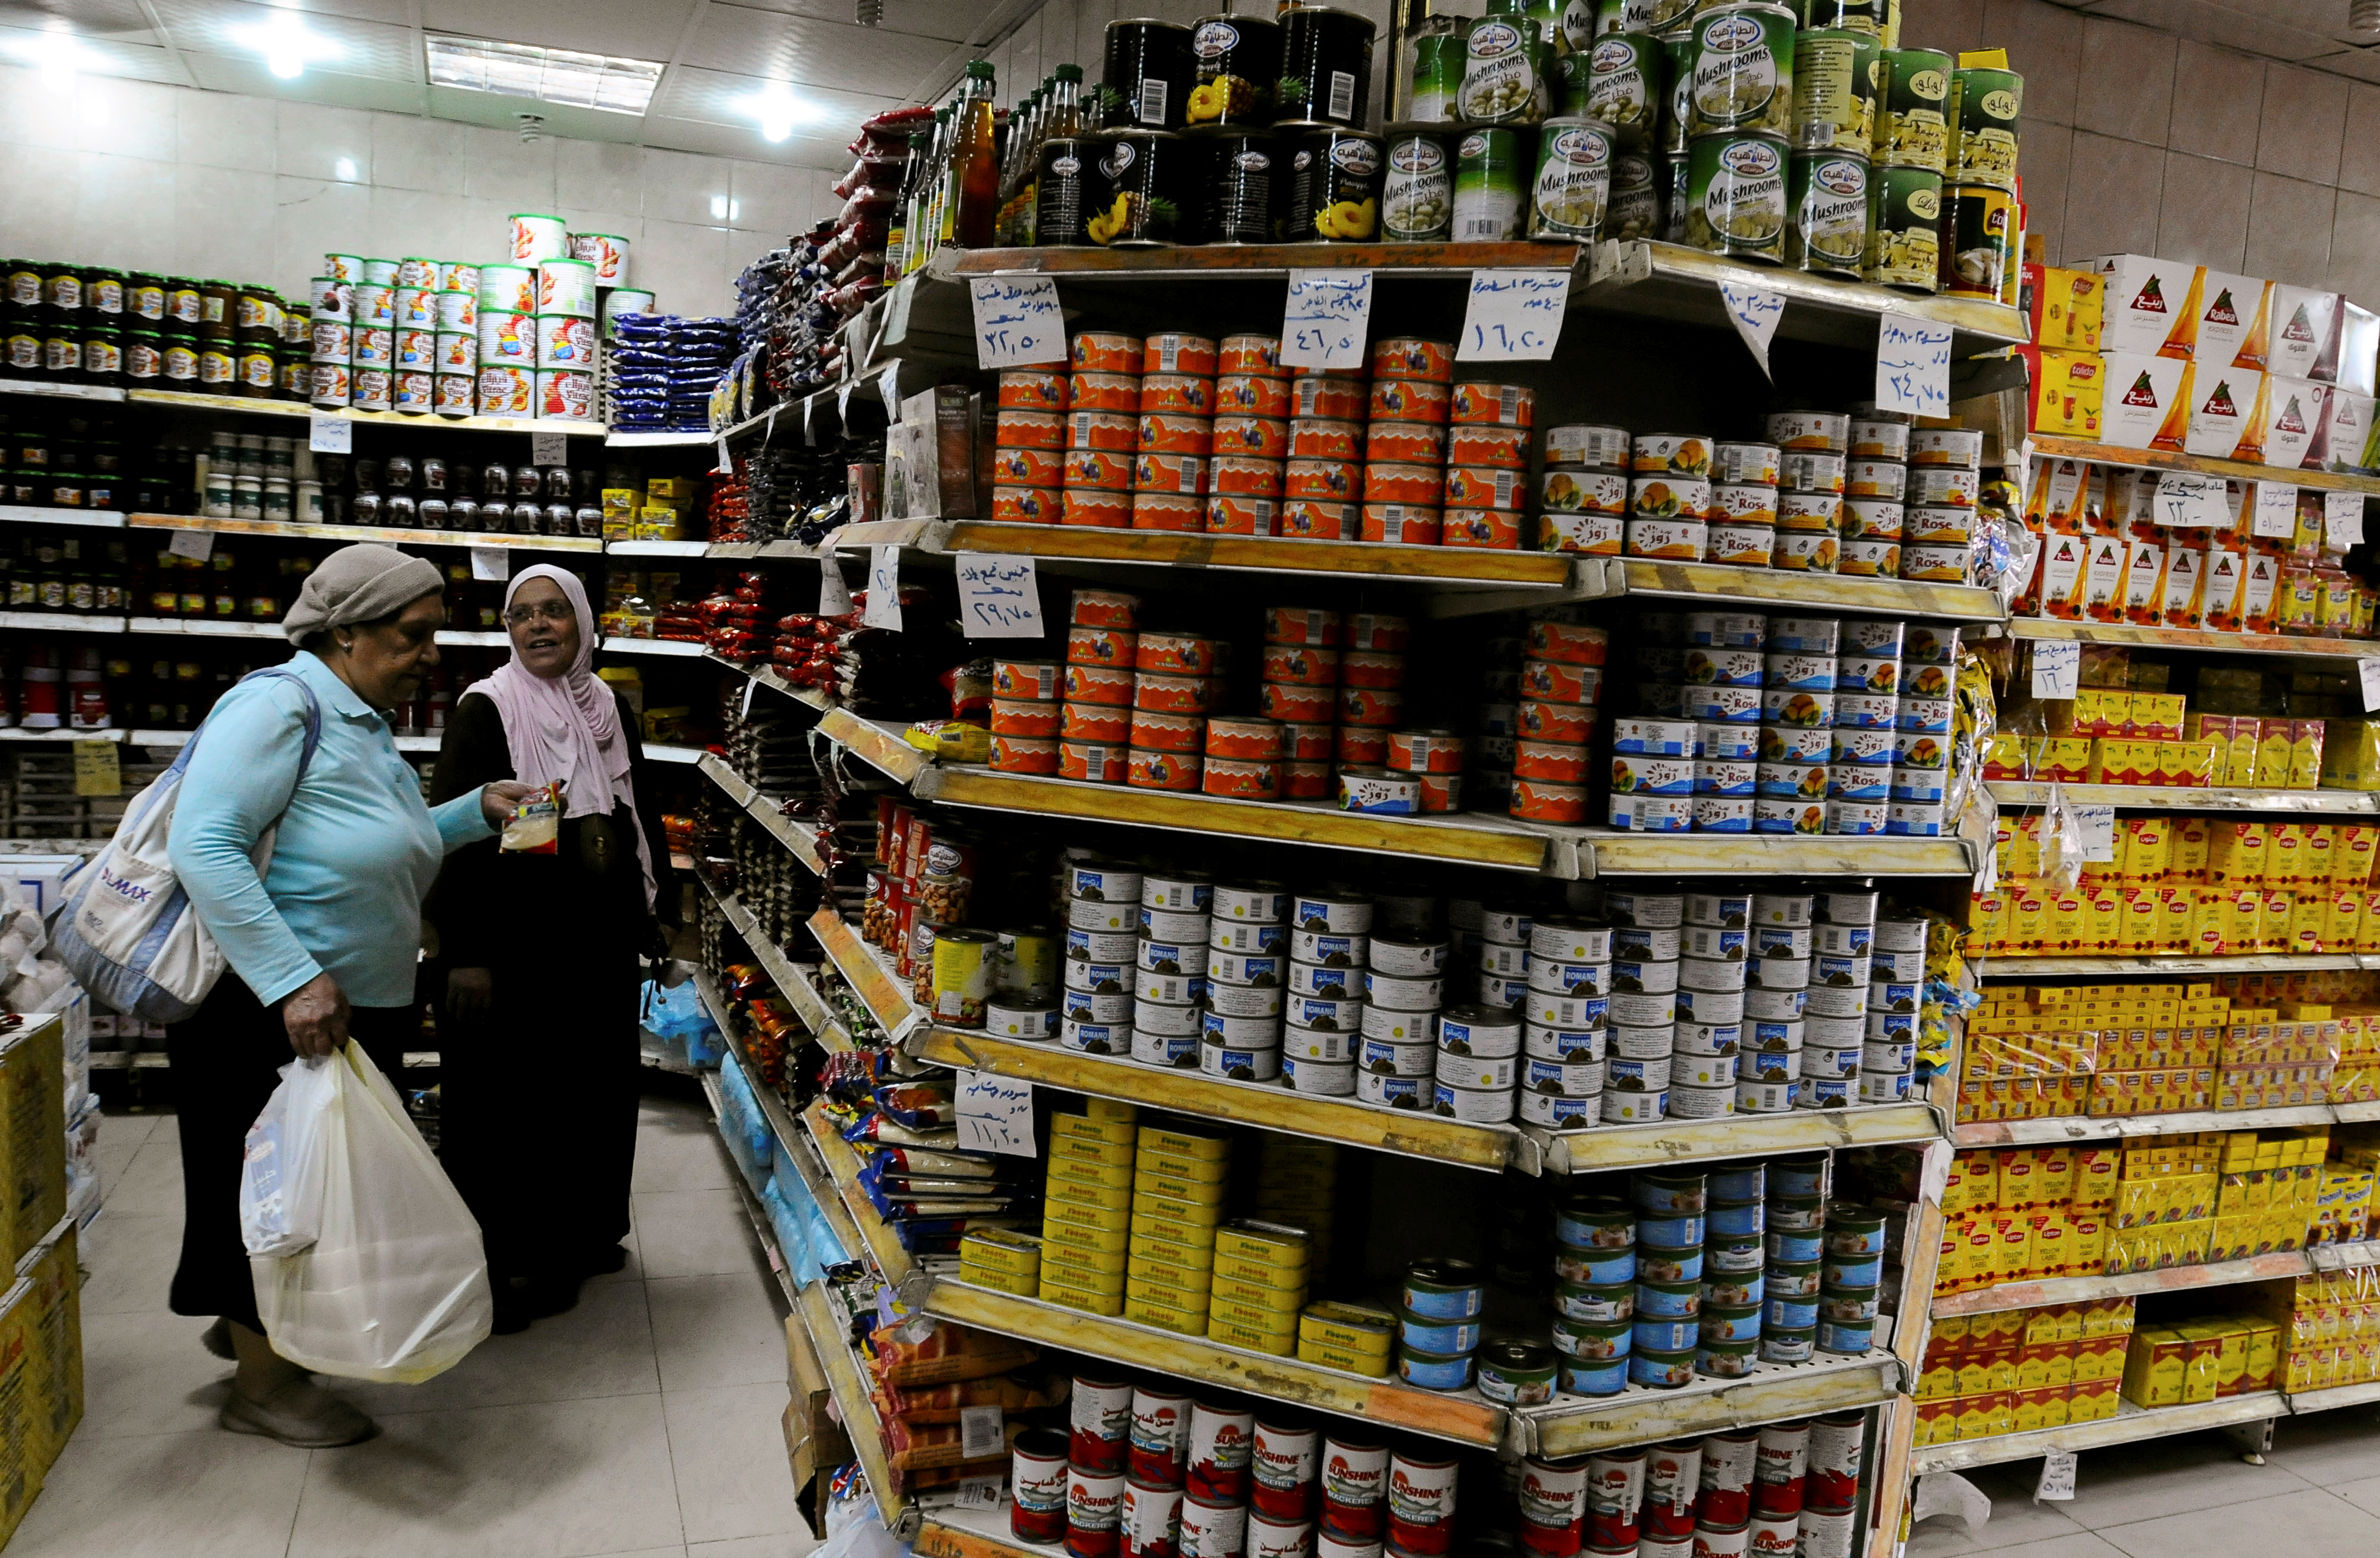 Two Egyptian women shopping in a supermarket in Cairo